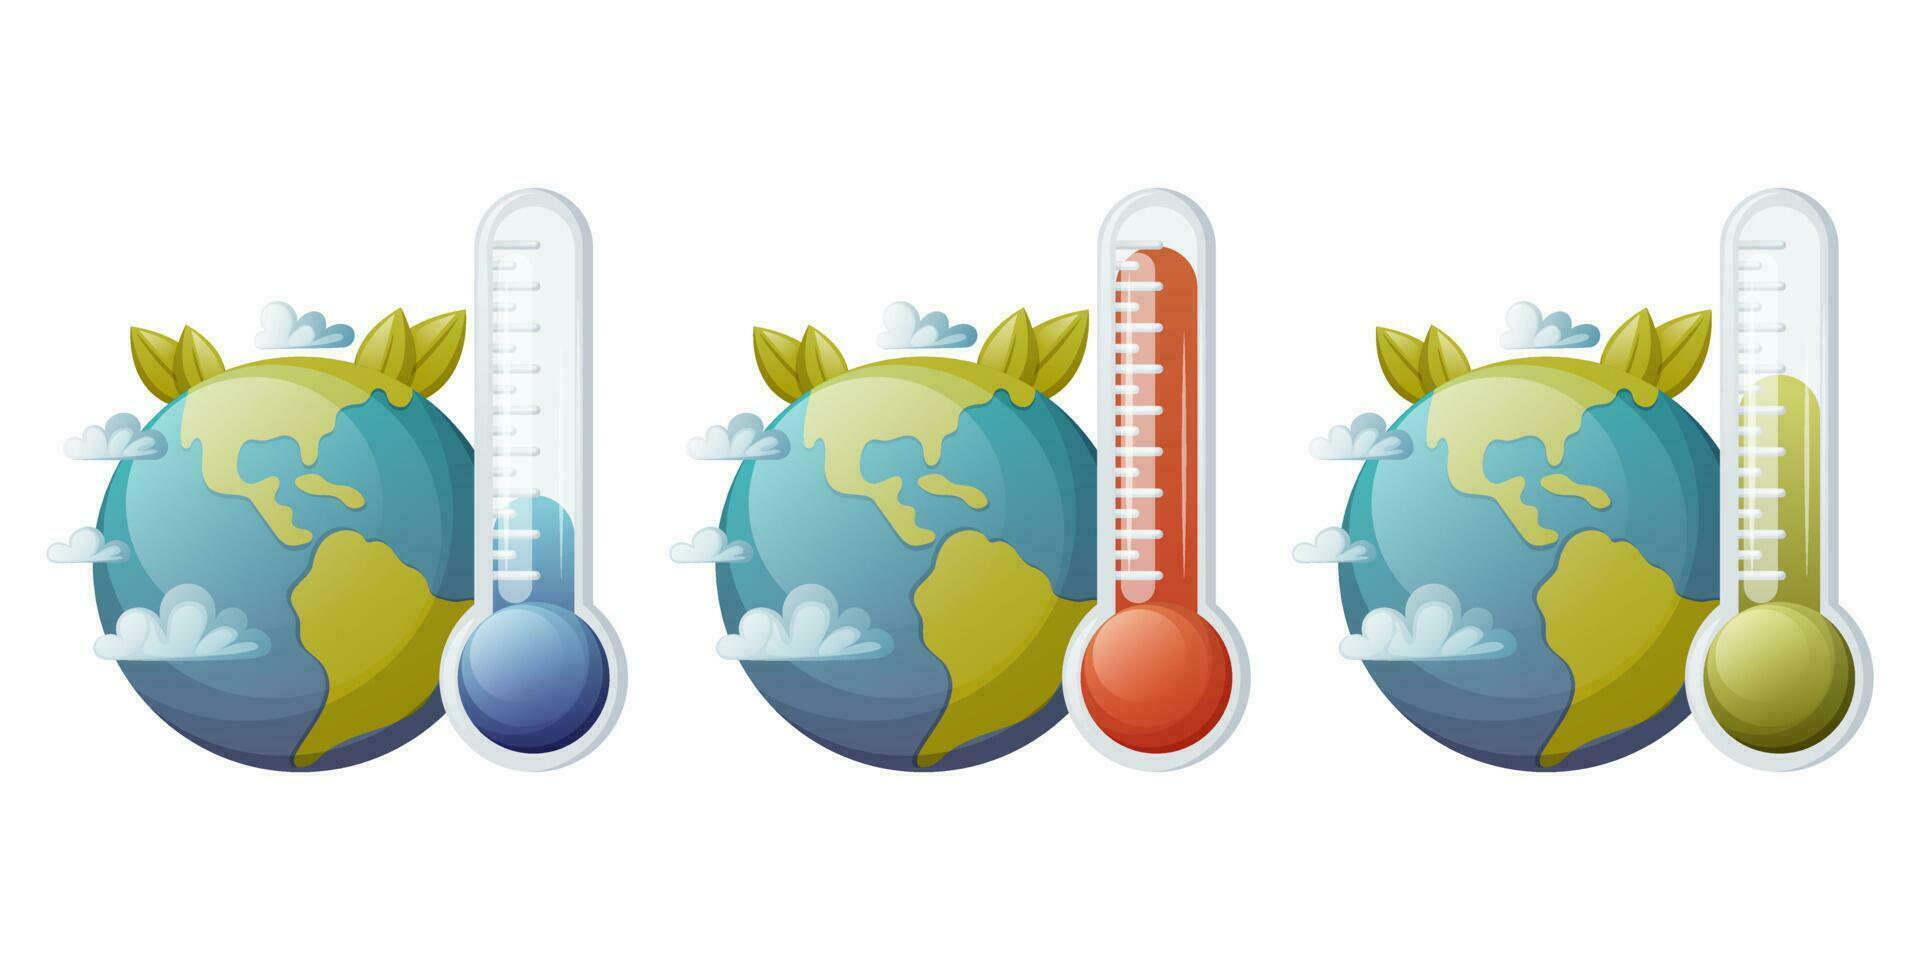 Earth and thermometer with indicator. The global problem of warming and cooling. The concept of ecology, save the planet, protect the environment. Vector illustration